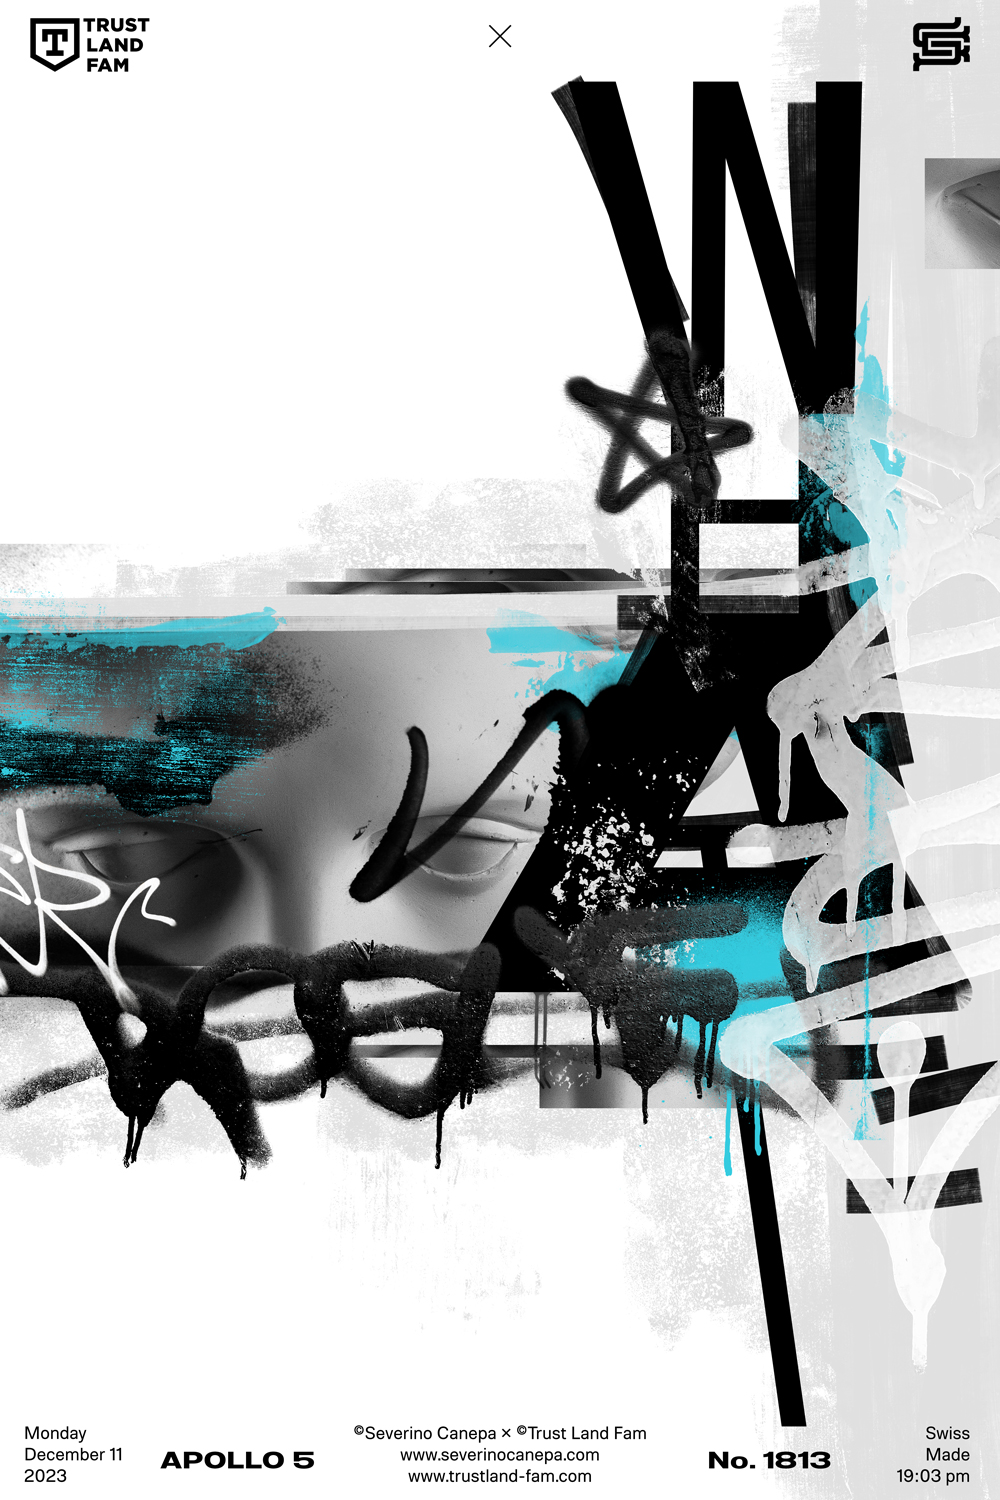 Digital artwork made with graffiti, the statue of Apollo, and typography